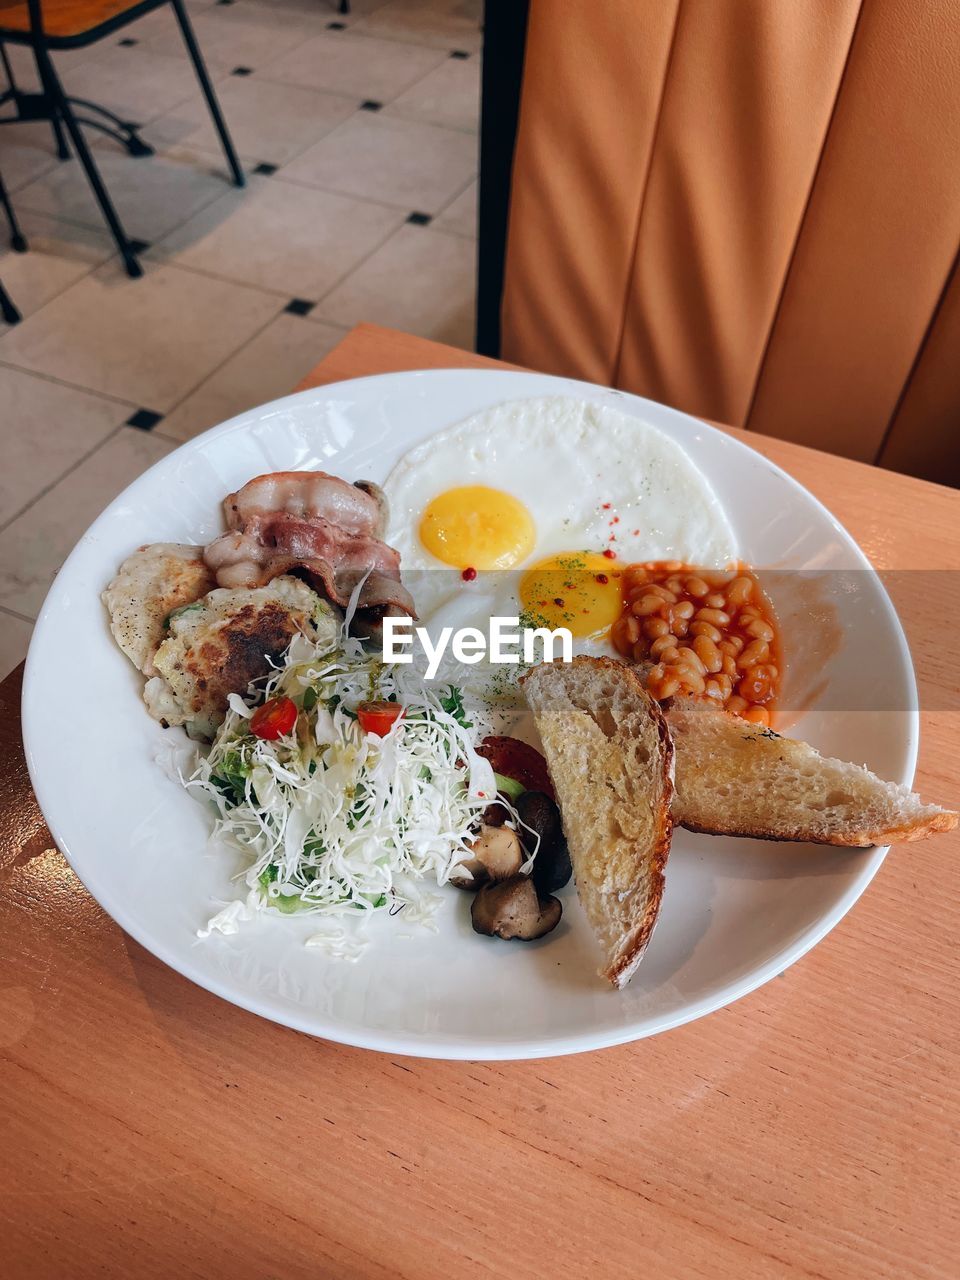 food, food and drink, plate, meal, dish, healthy eating, table, lunch, fried egg, wellbeing, freshness, cuisine, vegetable, indoors, meat, breakfast, no people, egg, high angle view, fried, brunch, dinner, business, restaurant, bread, serving size, produce, rice - food staple